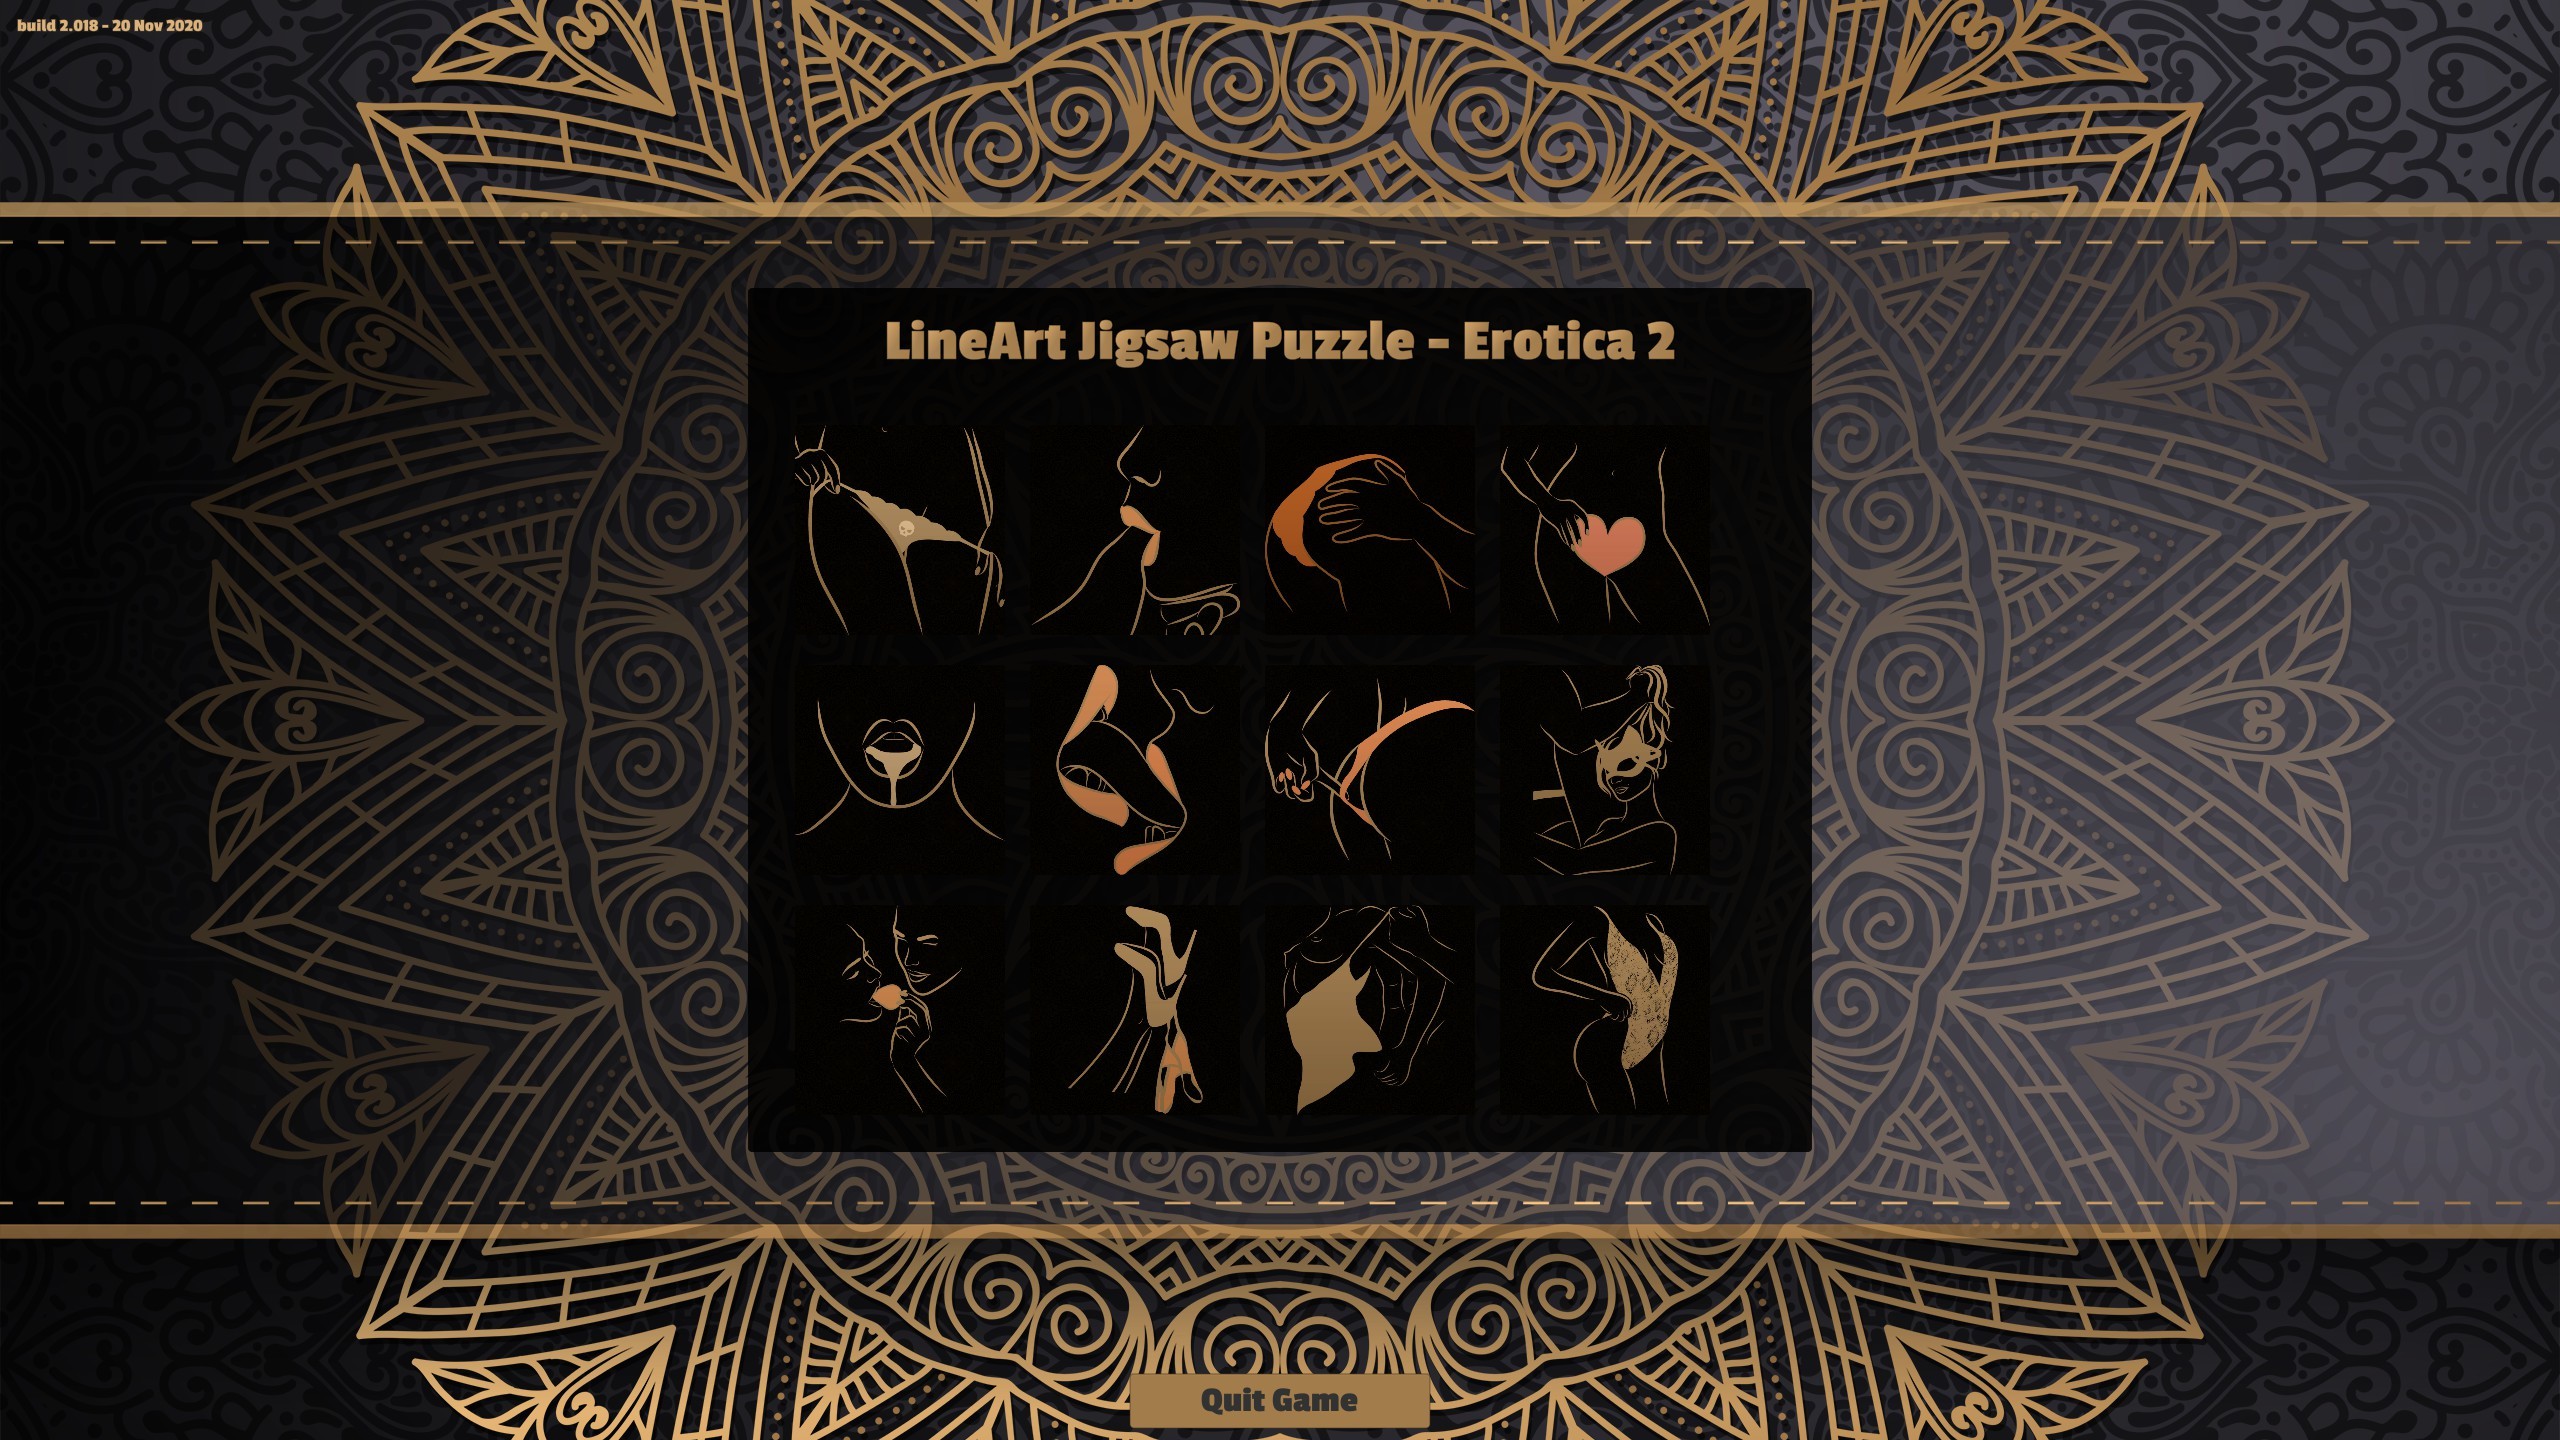 LineArt Jigsaw Puzzle - Erotica 2 Steam CD Key 0.21$